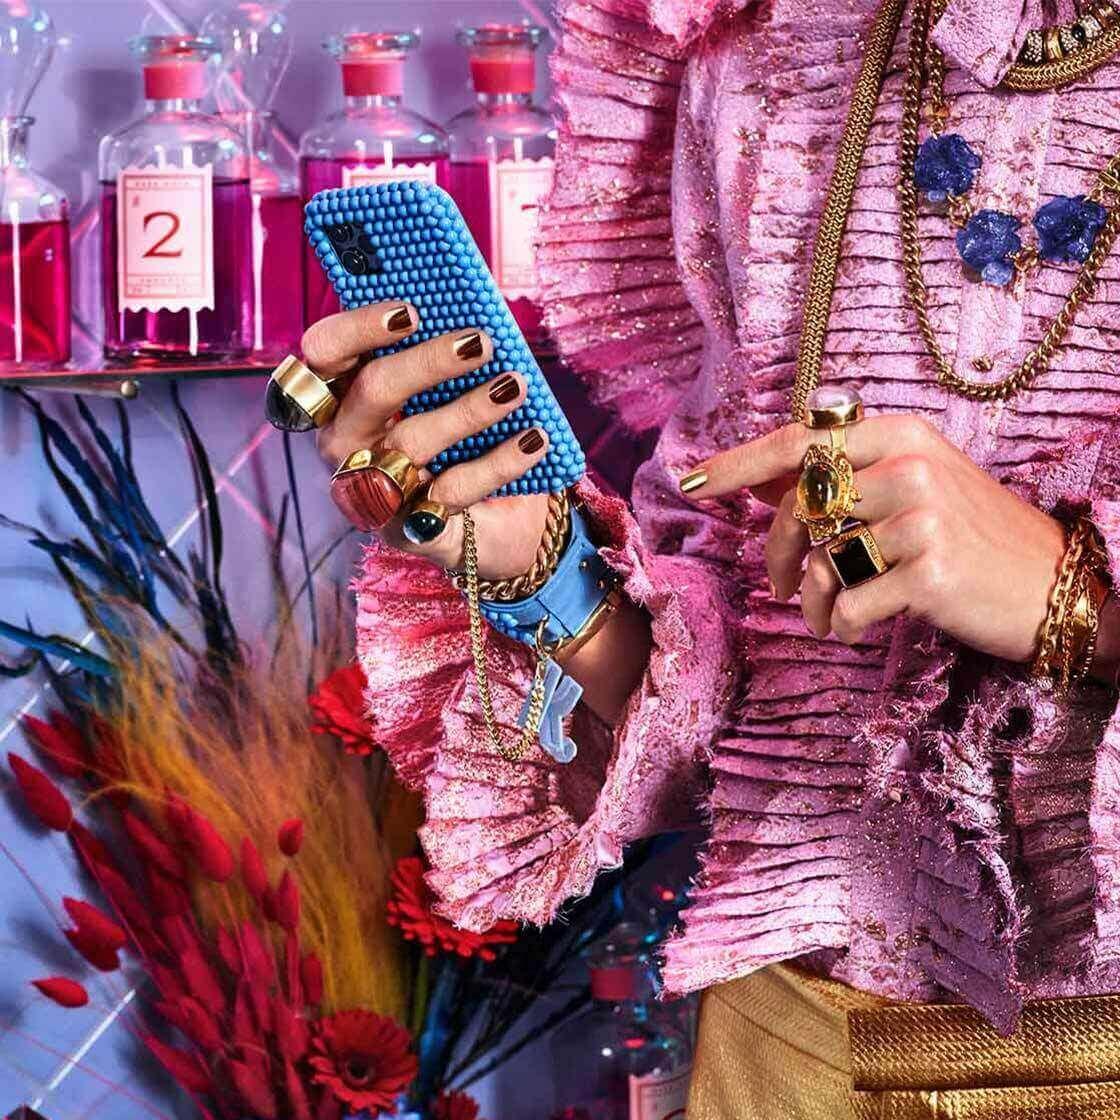 Woman in a pink ruffled shirt, holding a mobile phone in a blue case